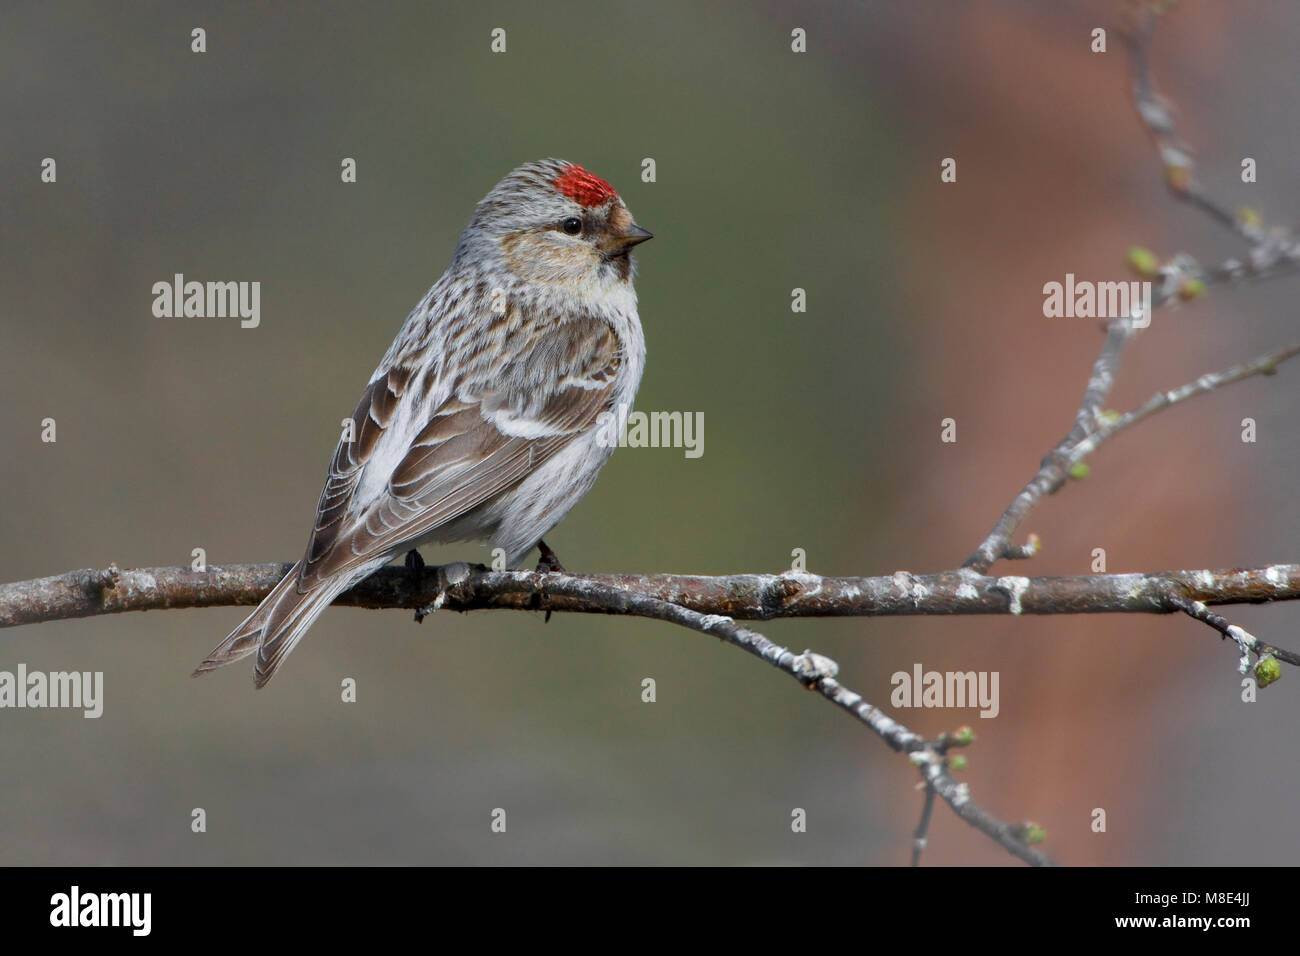 Witstuitbarmsijs op een takje; Arctic Redpoll perched on a twig Stock Photo